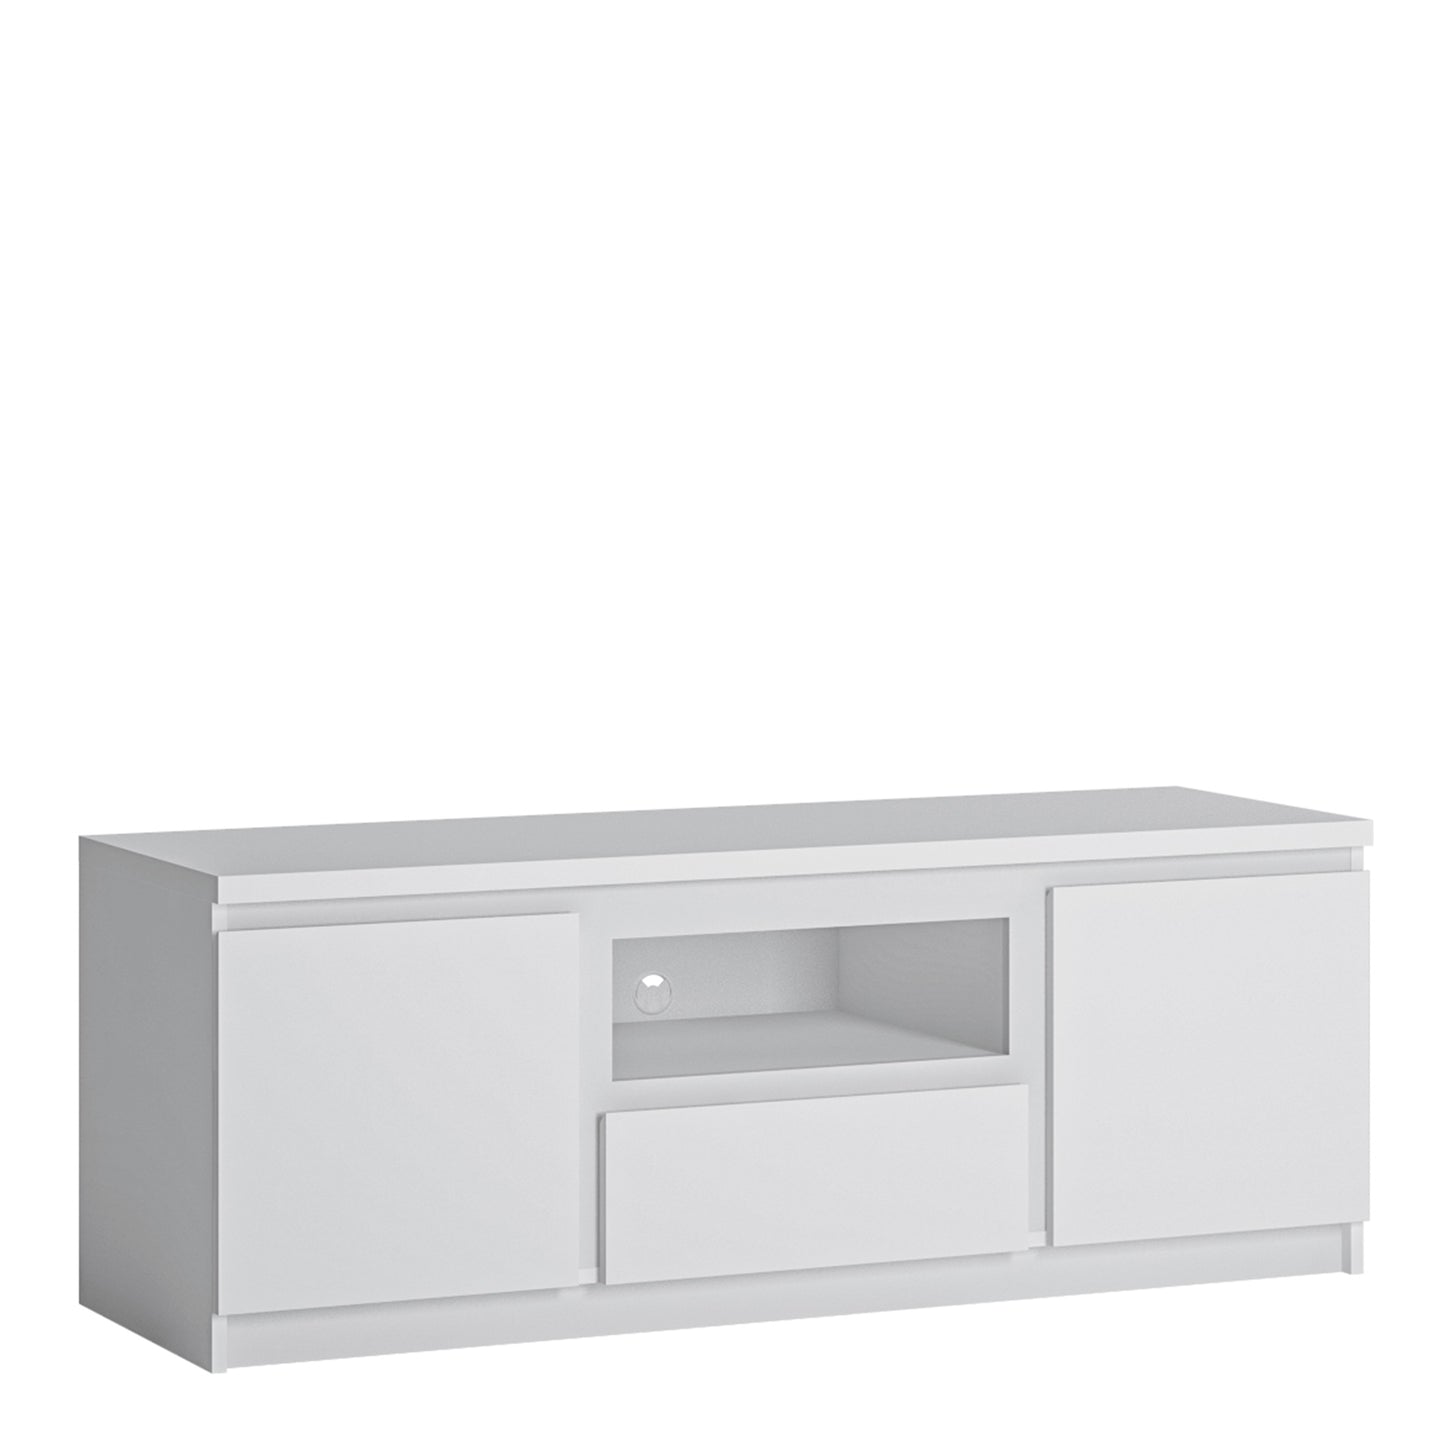 Fribo White Fribo 2 door 1 drawer 136 cm wide TV cabinet in White